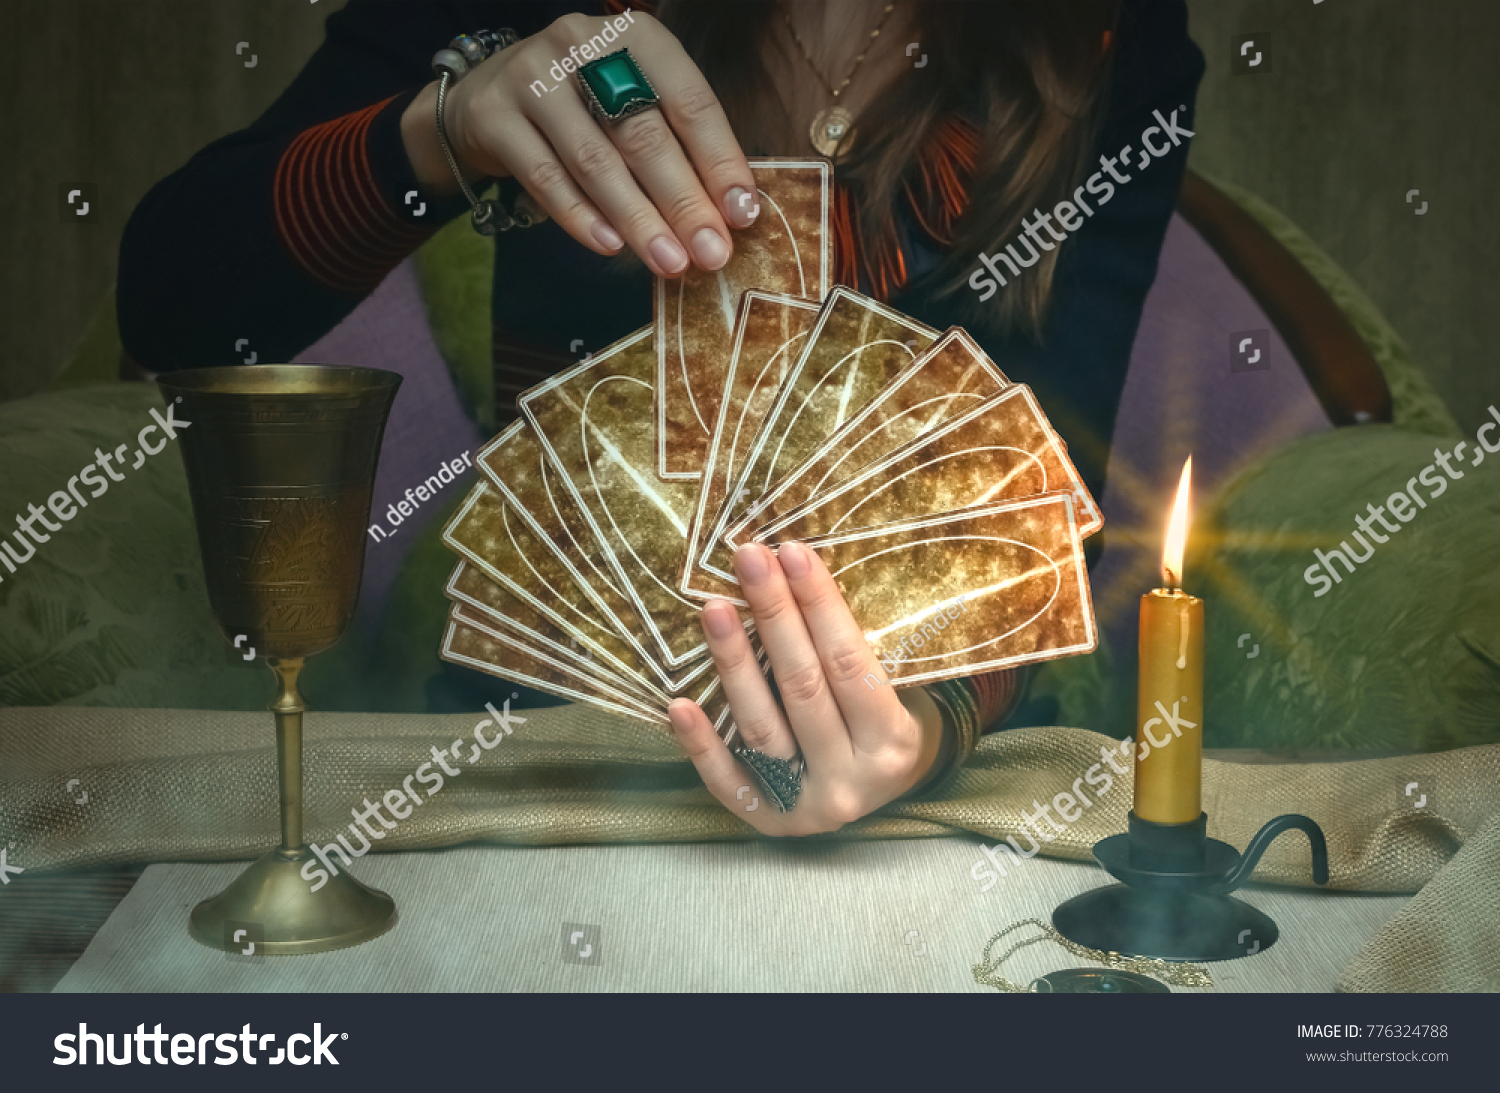 Tarot cards on fortune teller desk table. Future reading. Woman fortune teller holding and hands a deck of tarot cards. #776324788